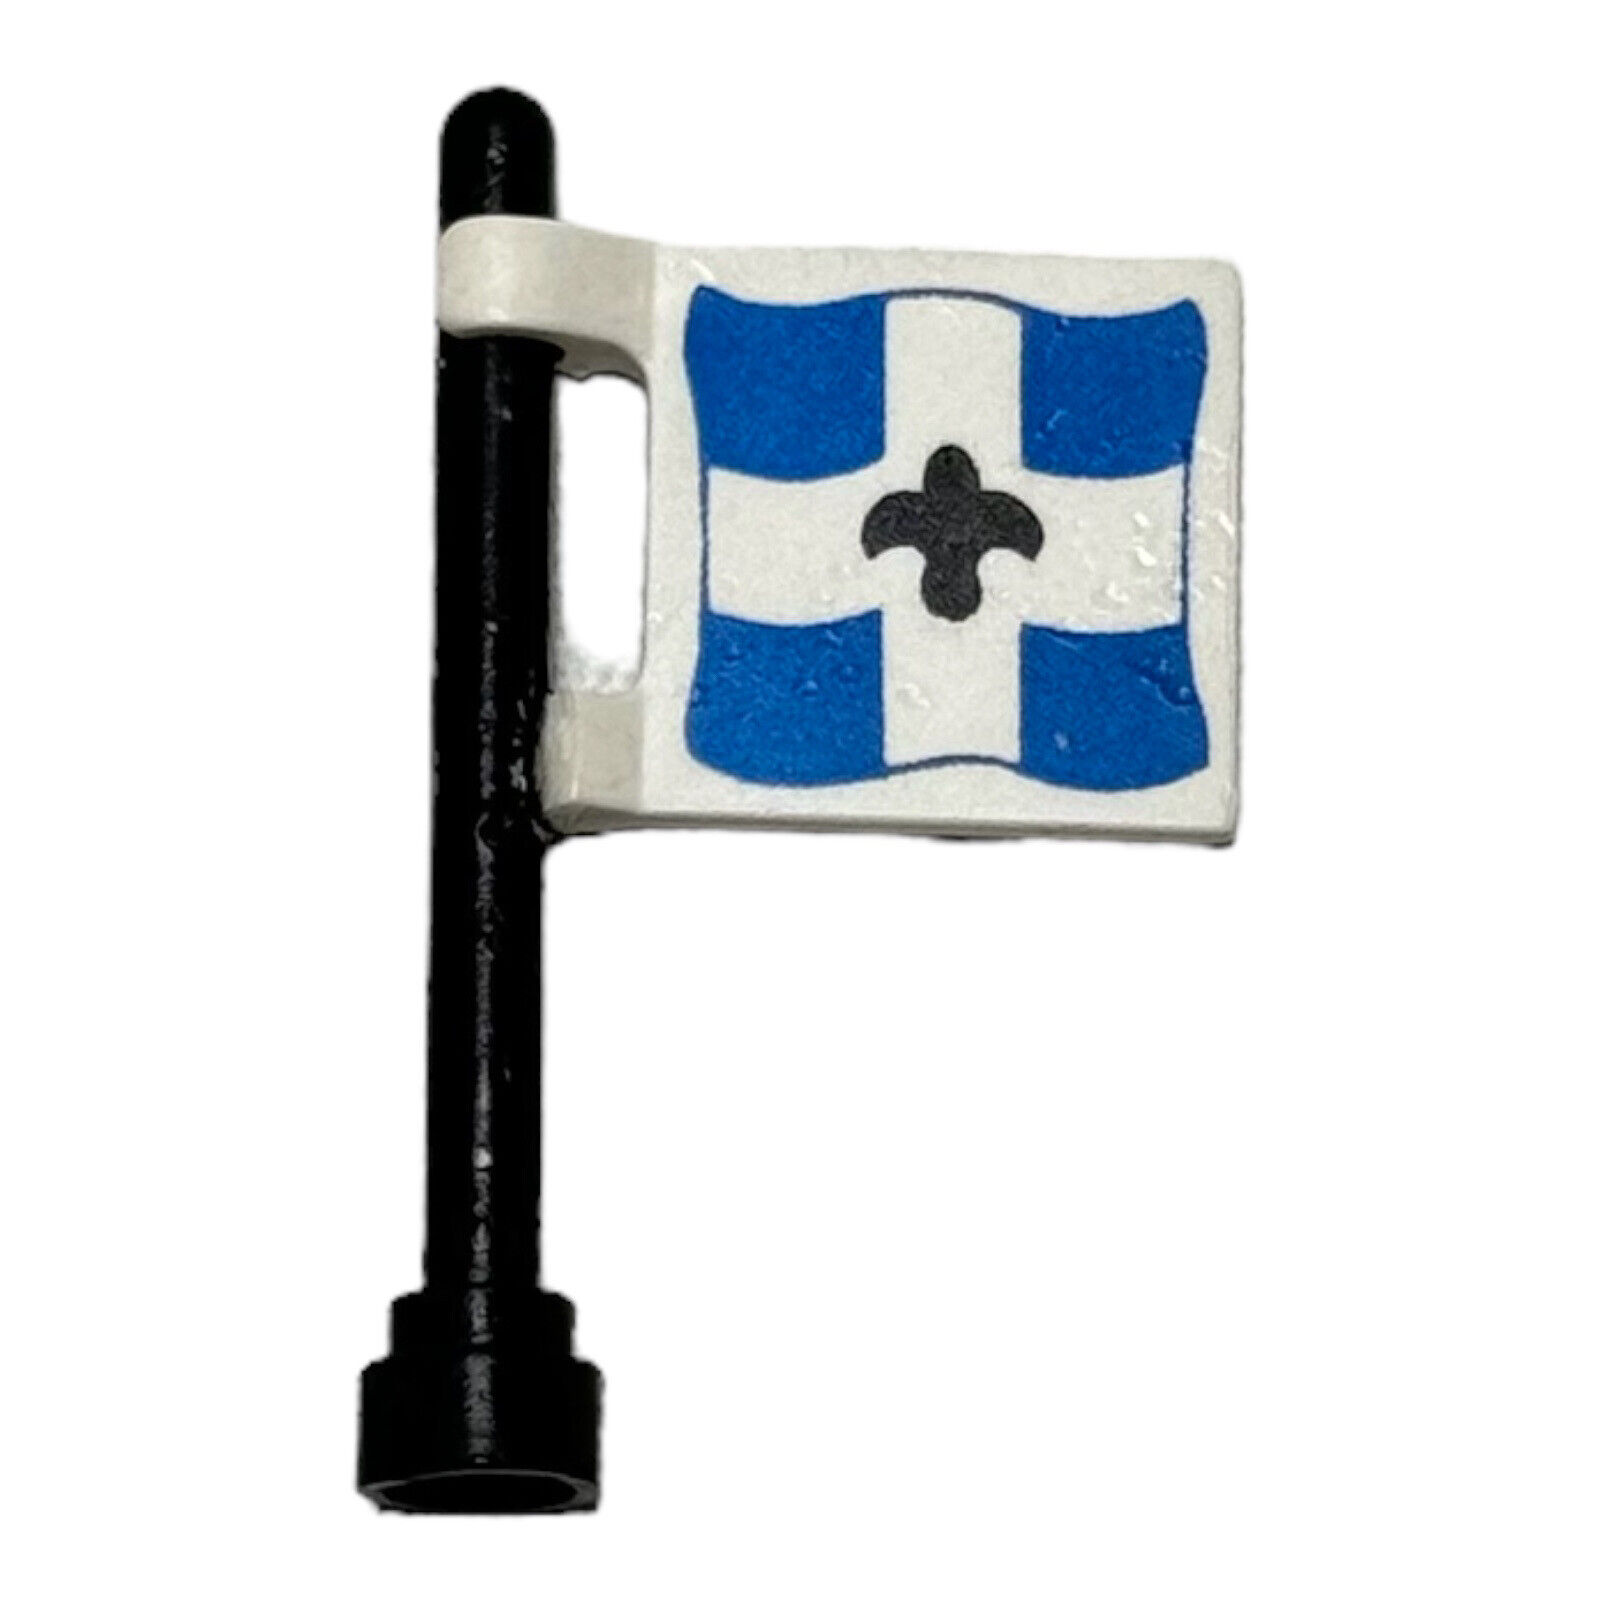 LEGO Flag 2x2 with Blue Imperial Guard 2335p04 Set 6276 6274 6265 6273 6259 6245